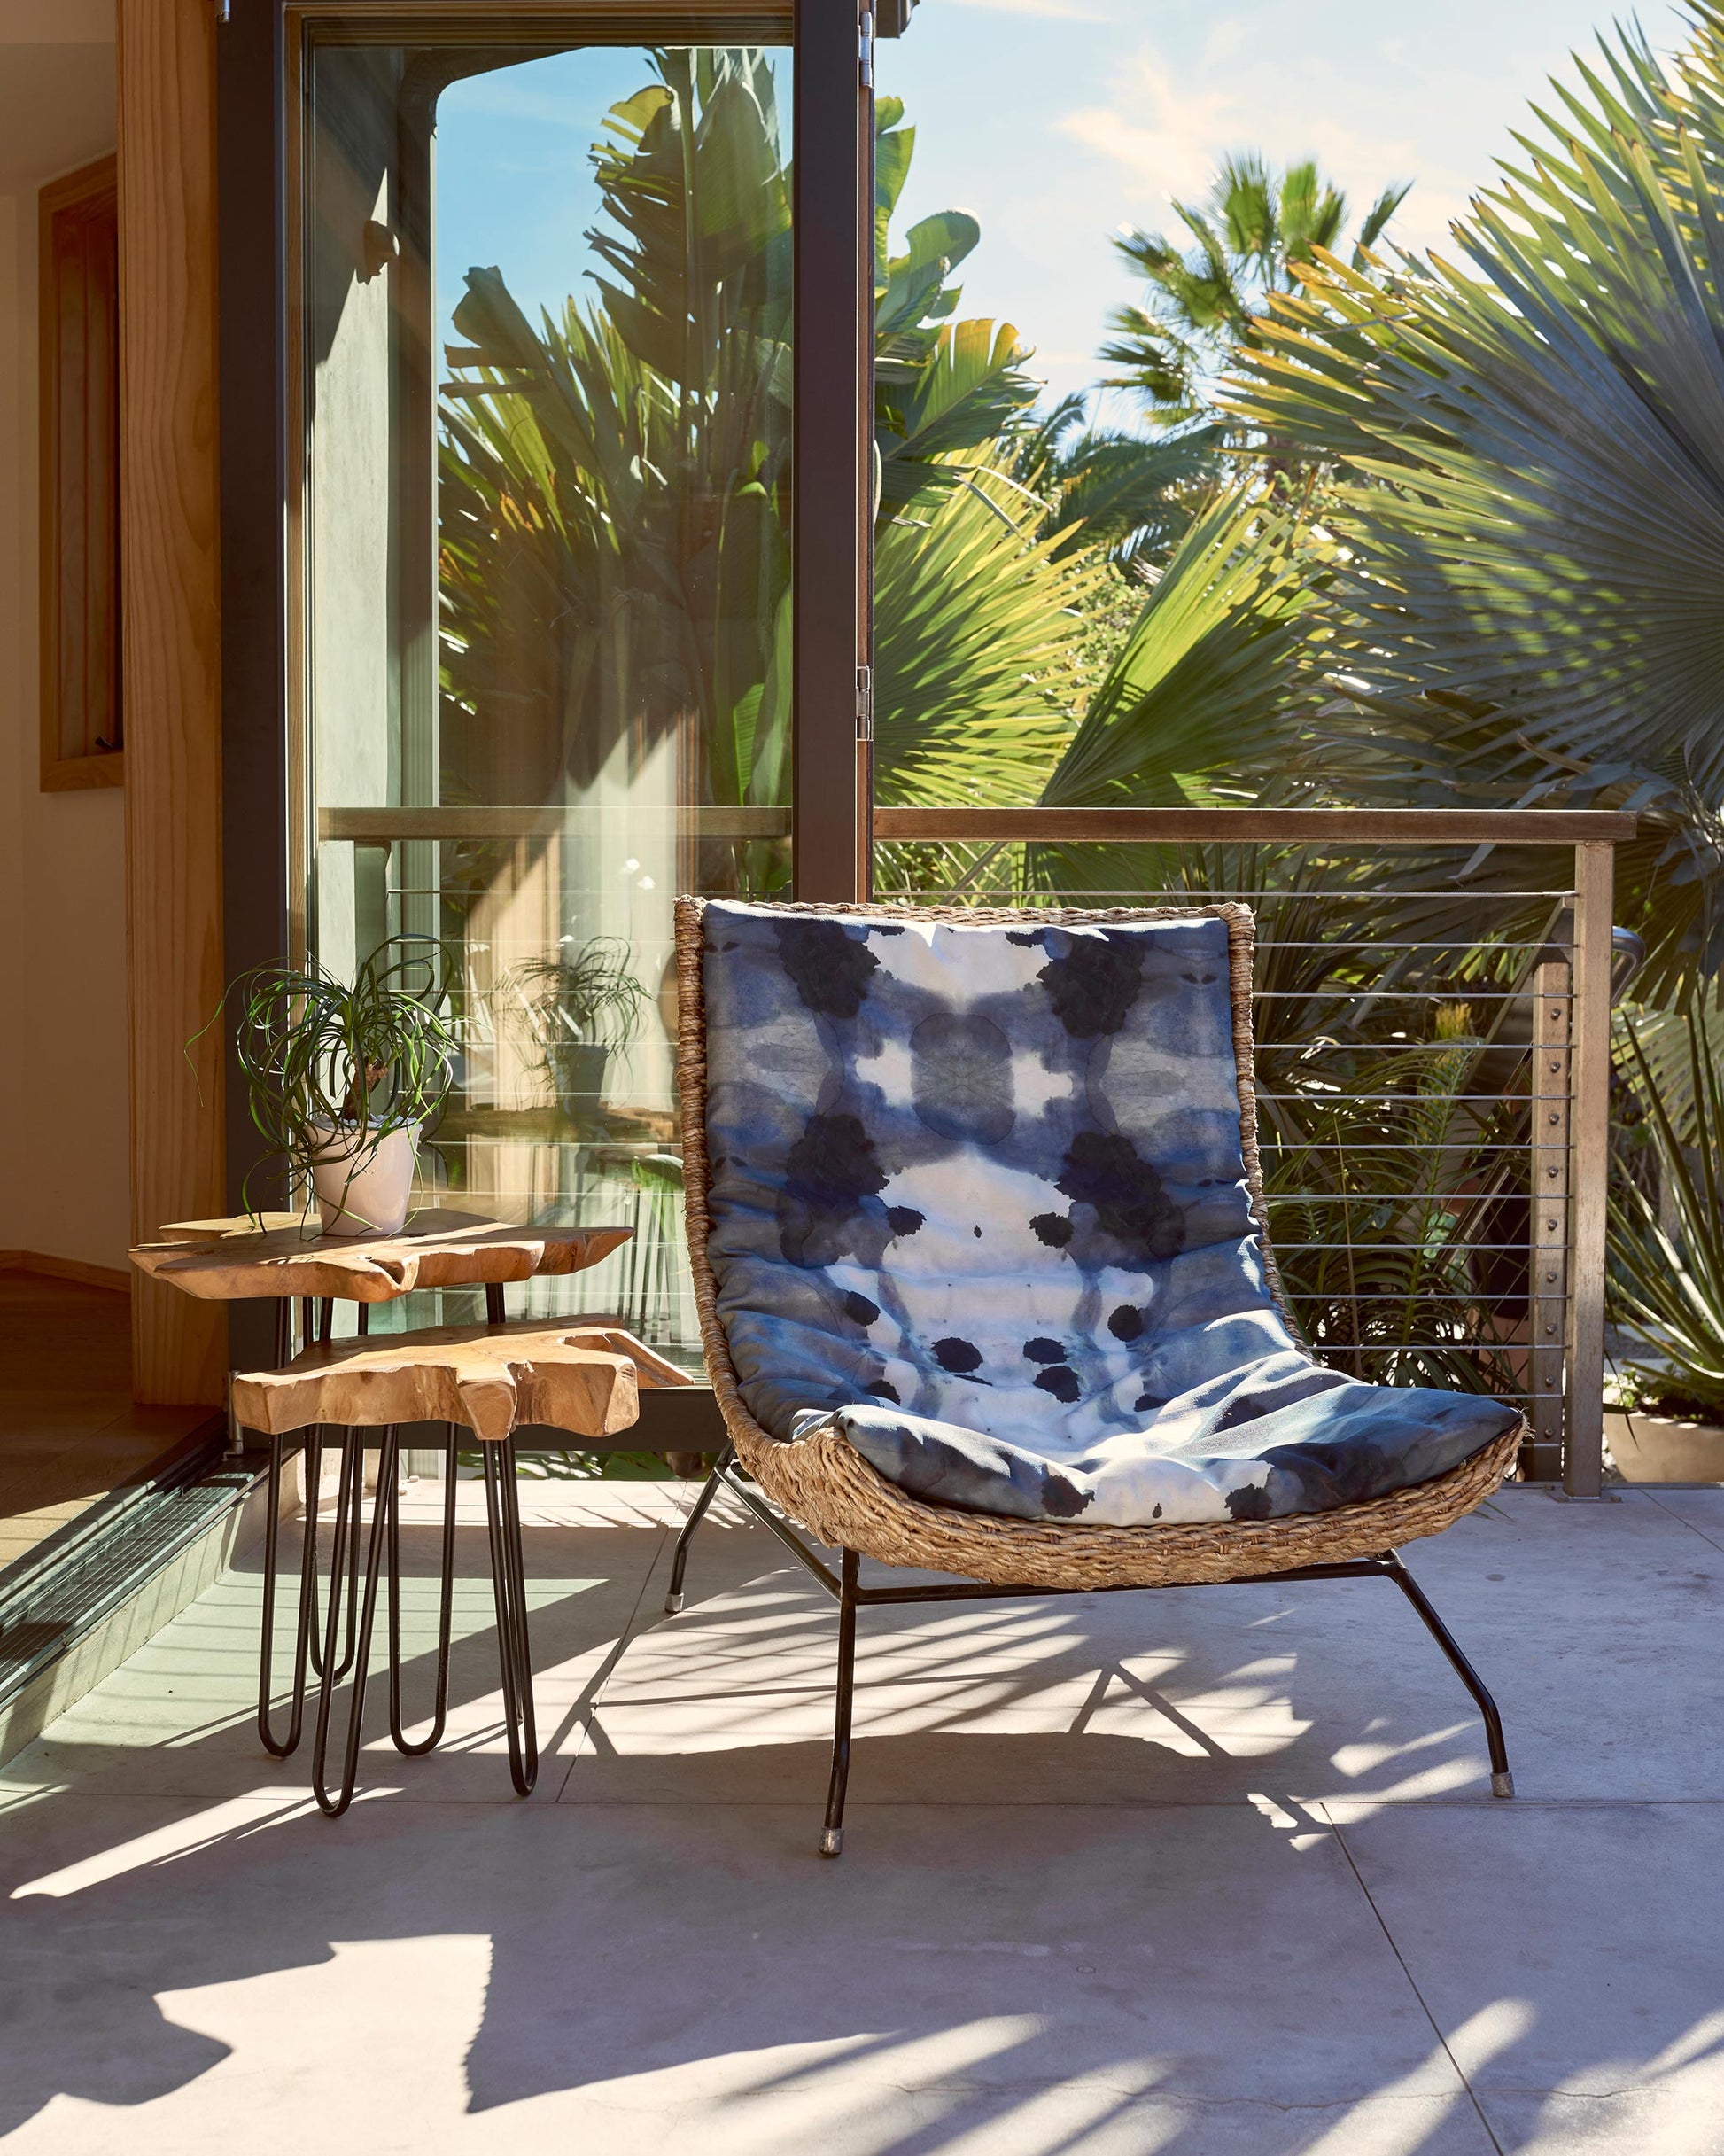 A luxurious Dynasty Performance Fabric||Indigo lounge chair on a Tuscany patio surrounded by palm trees.